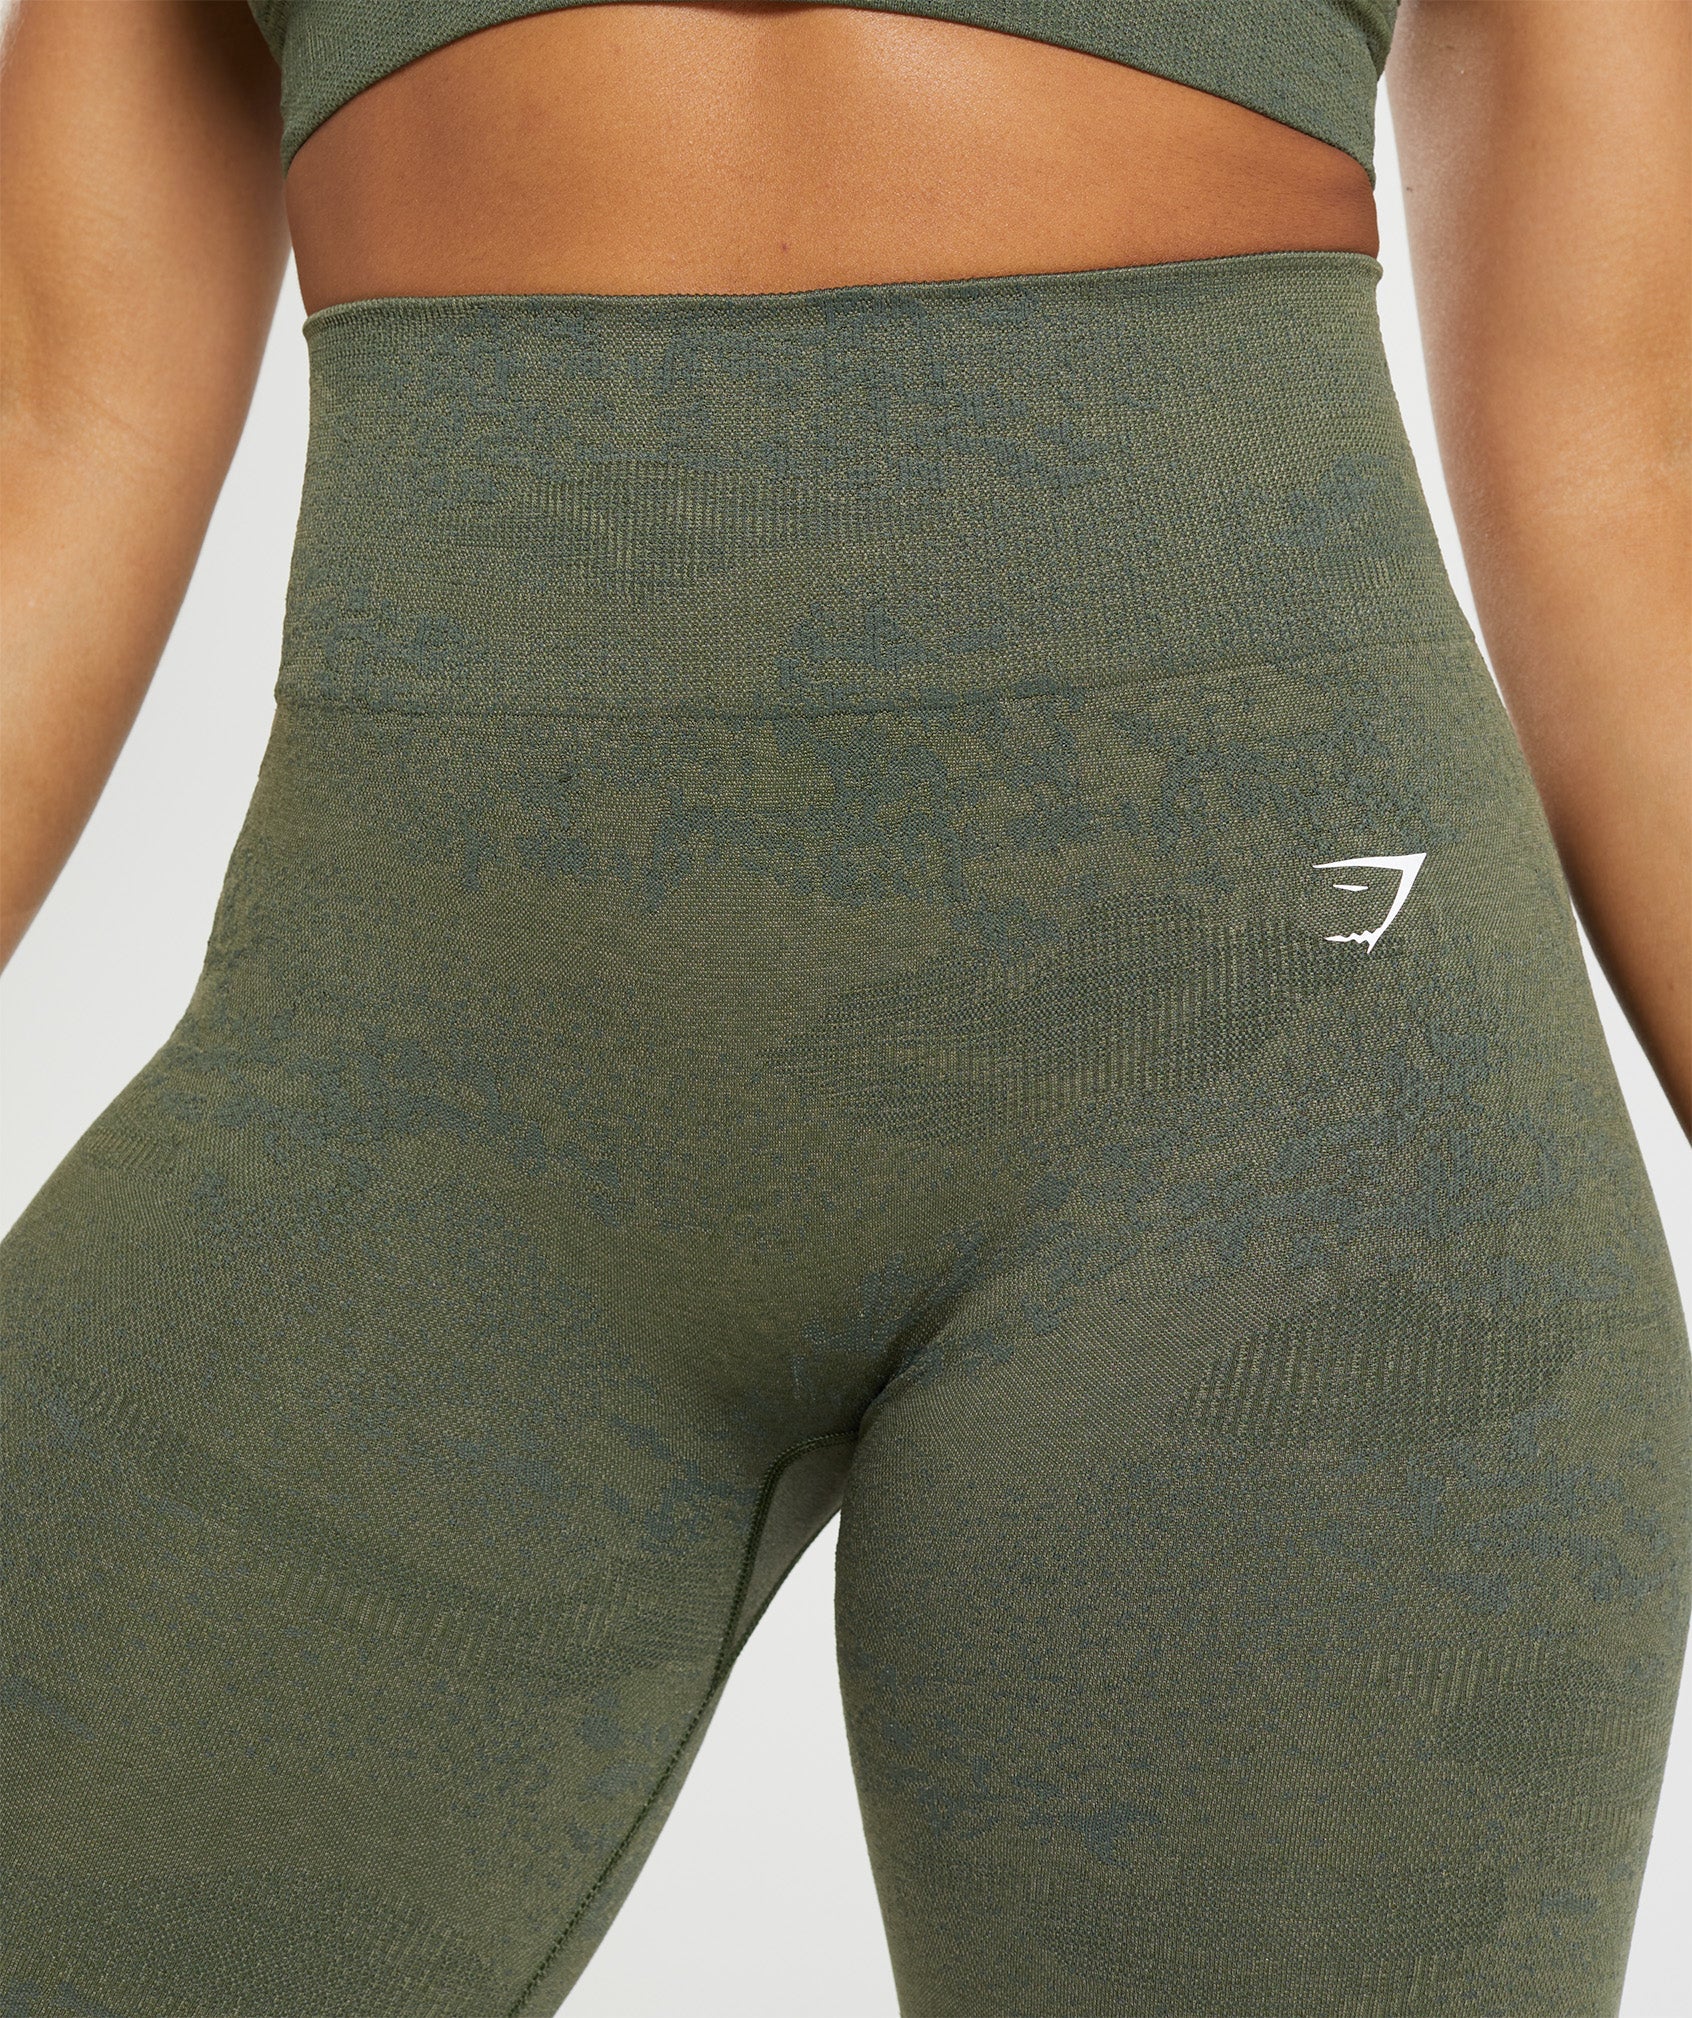 Adapt Camo Seamless Leggings in Moss Olive/Core Olive - view 6